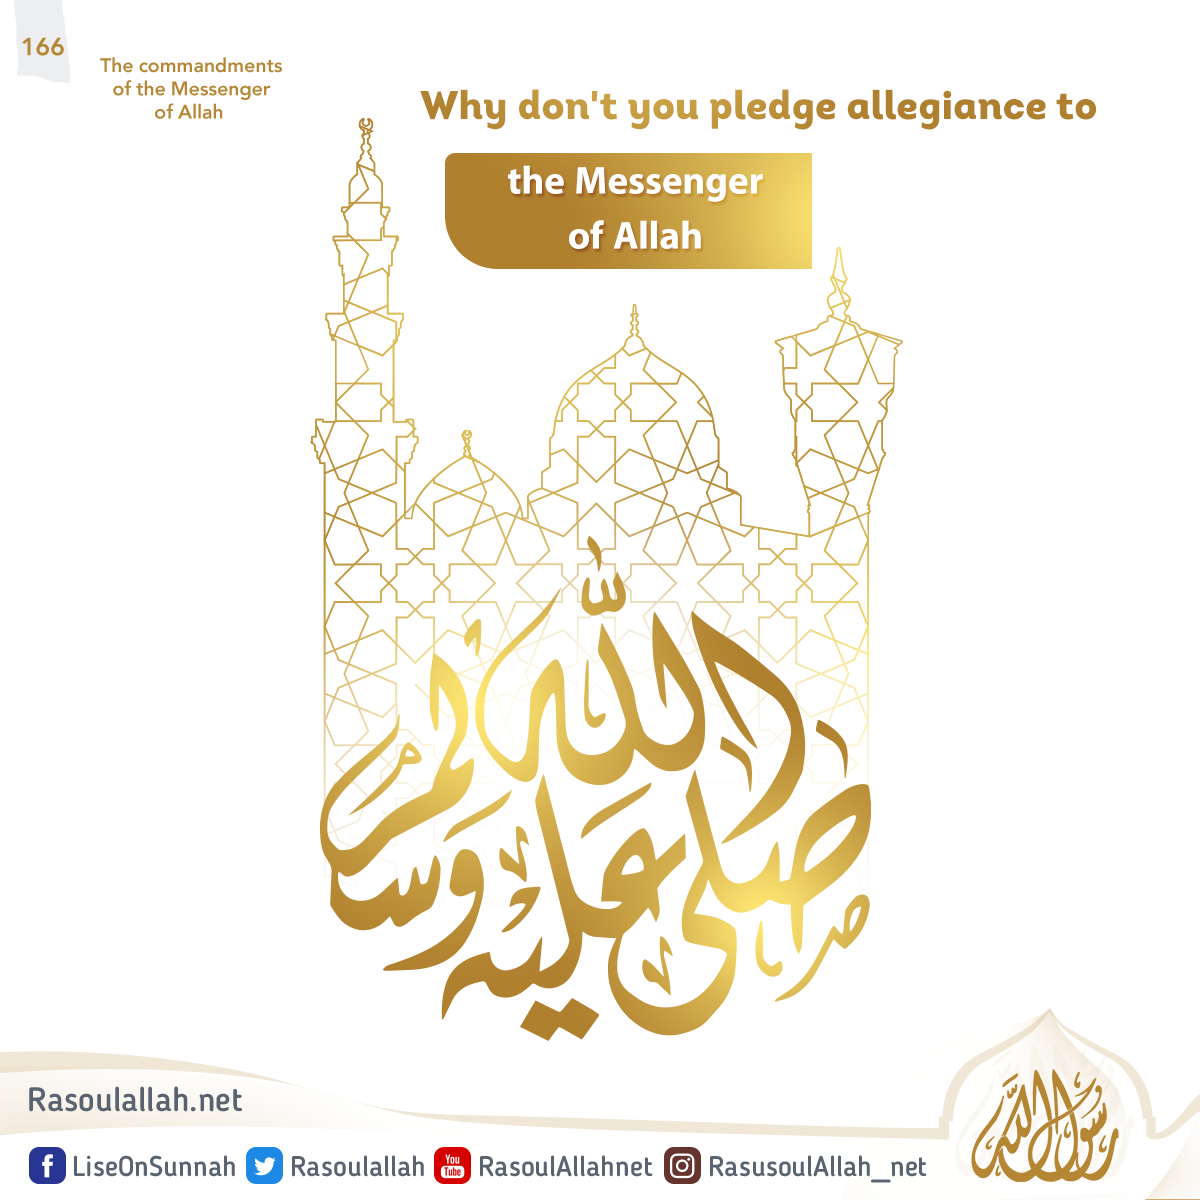 Why don't you pledge allegiance to the Messenger of Allah 